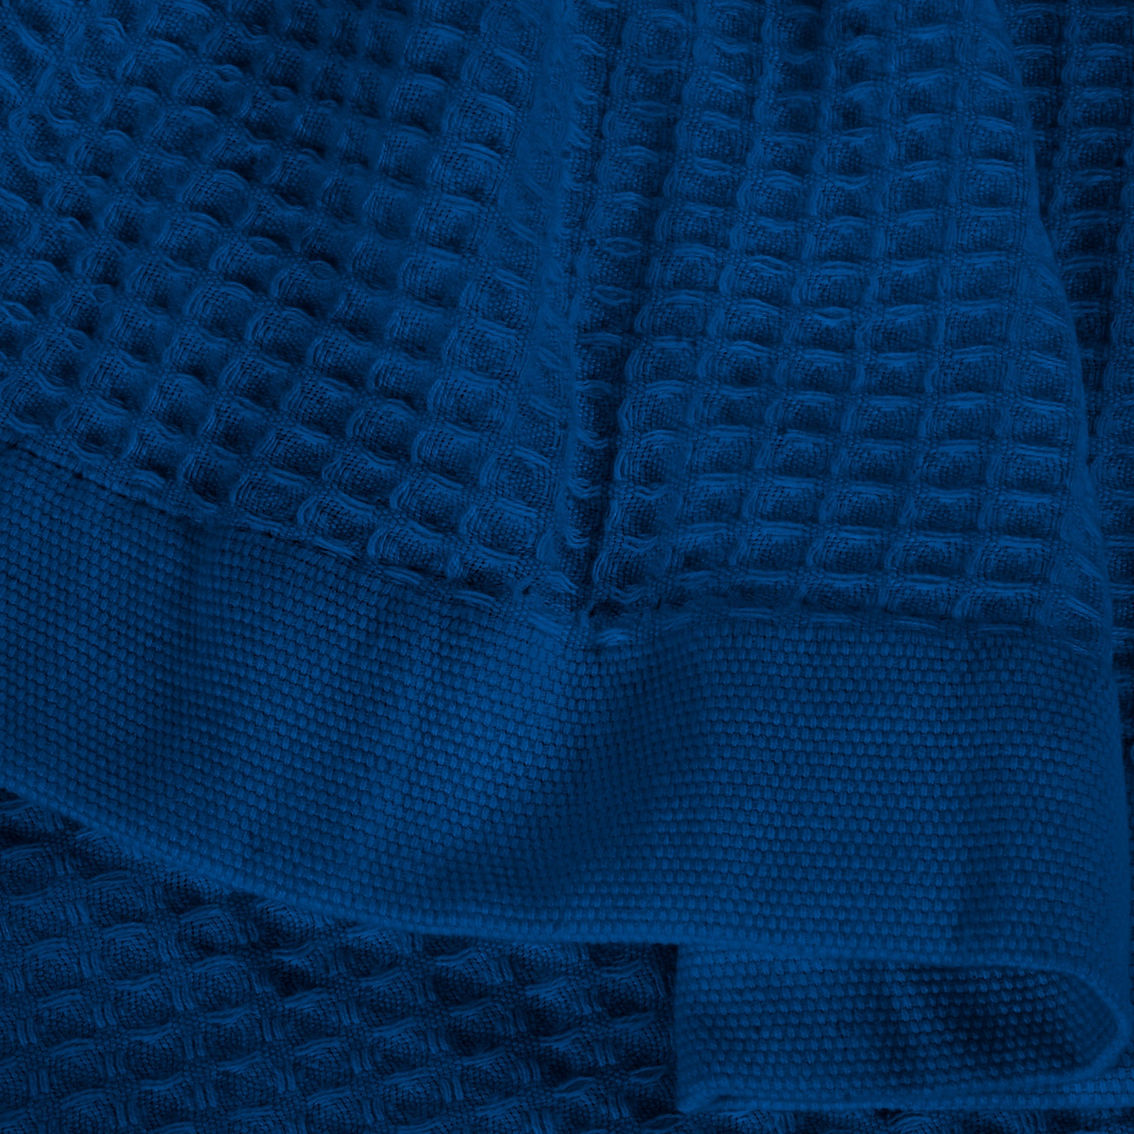 Pointehaven 300 GSM Long Staple Soft Cotton Hypoallergenic Waffle Weave Blanket - Image 3 of 4